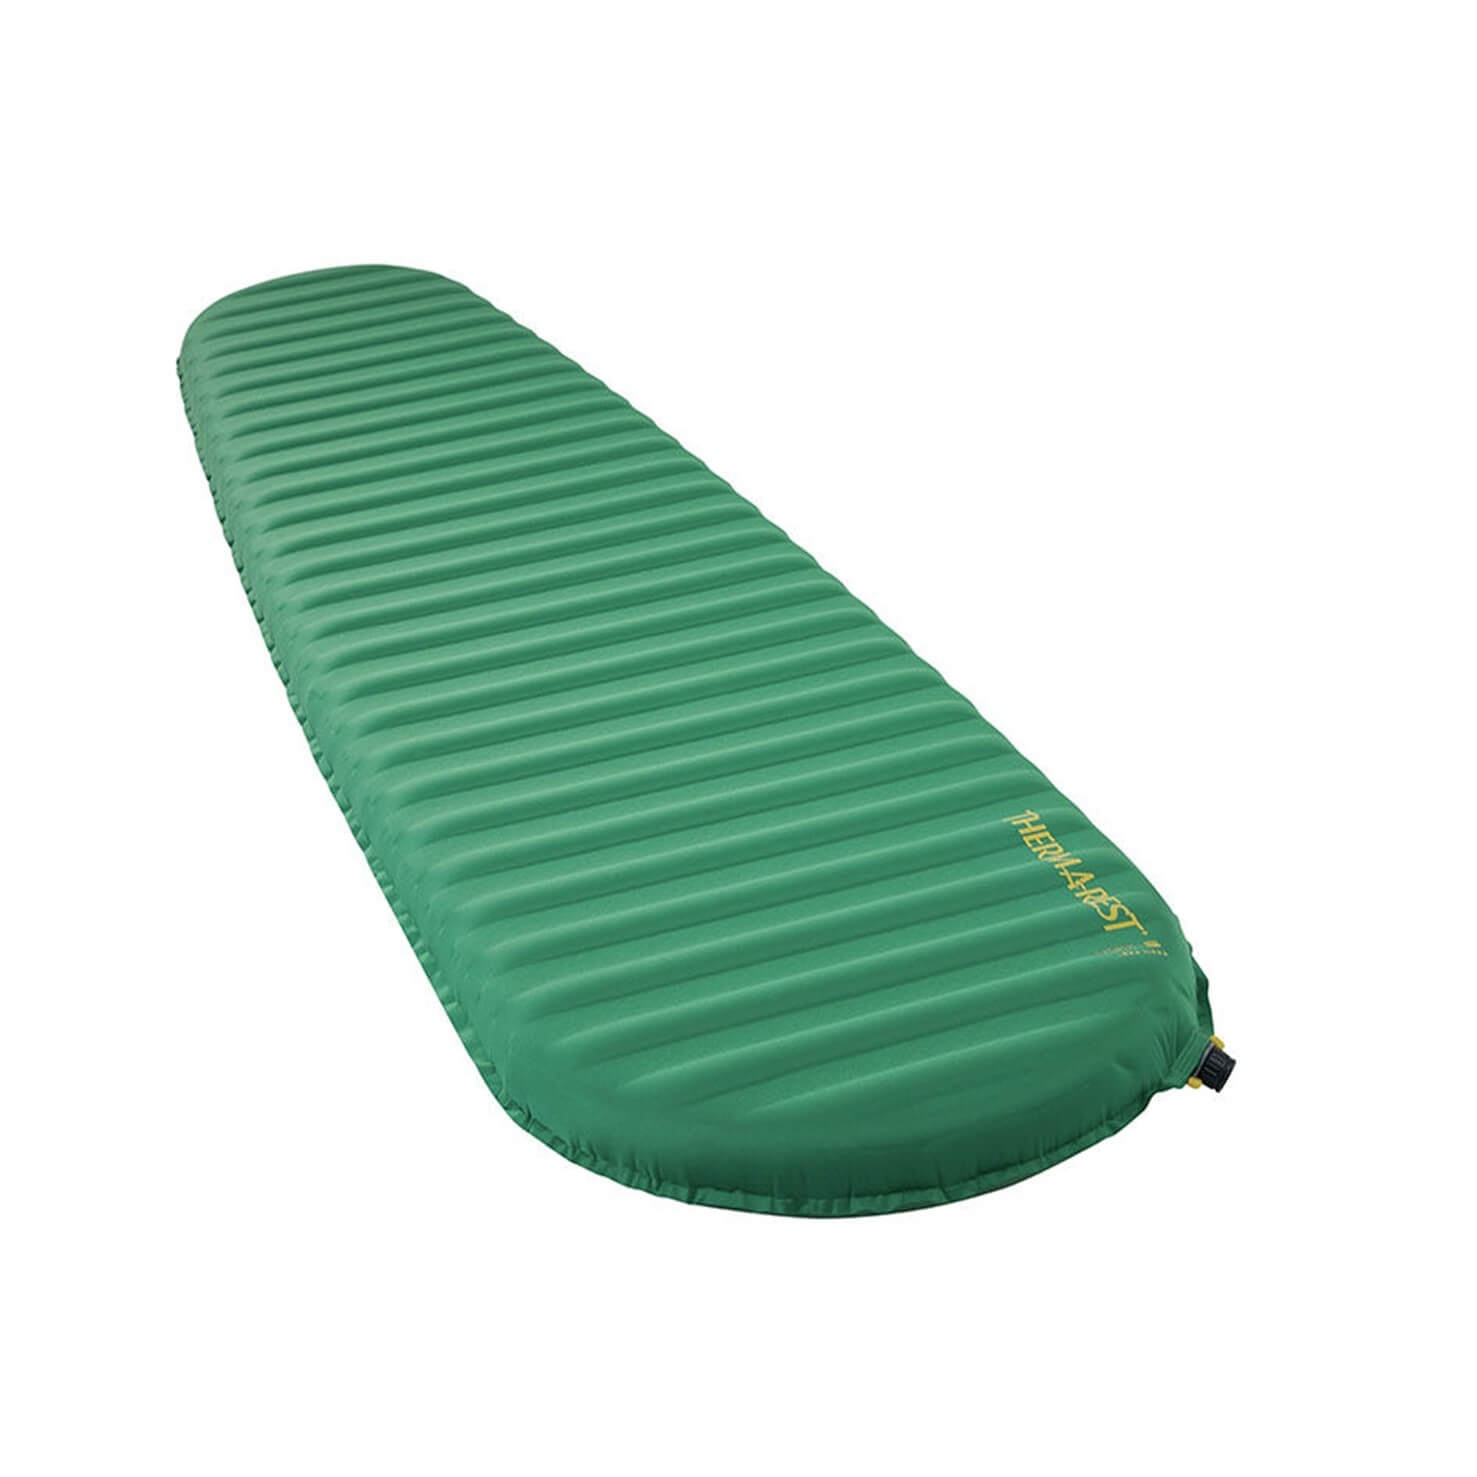 Therma-Rest Thermarest Trail Pro™ Sleeping Pad